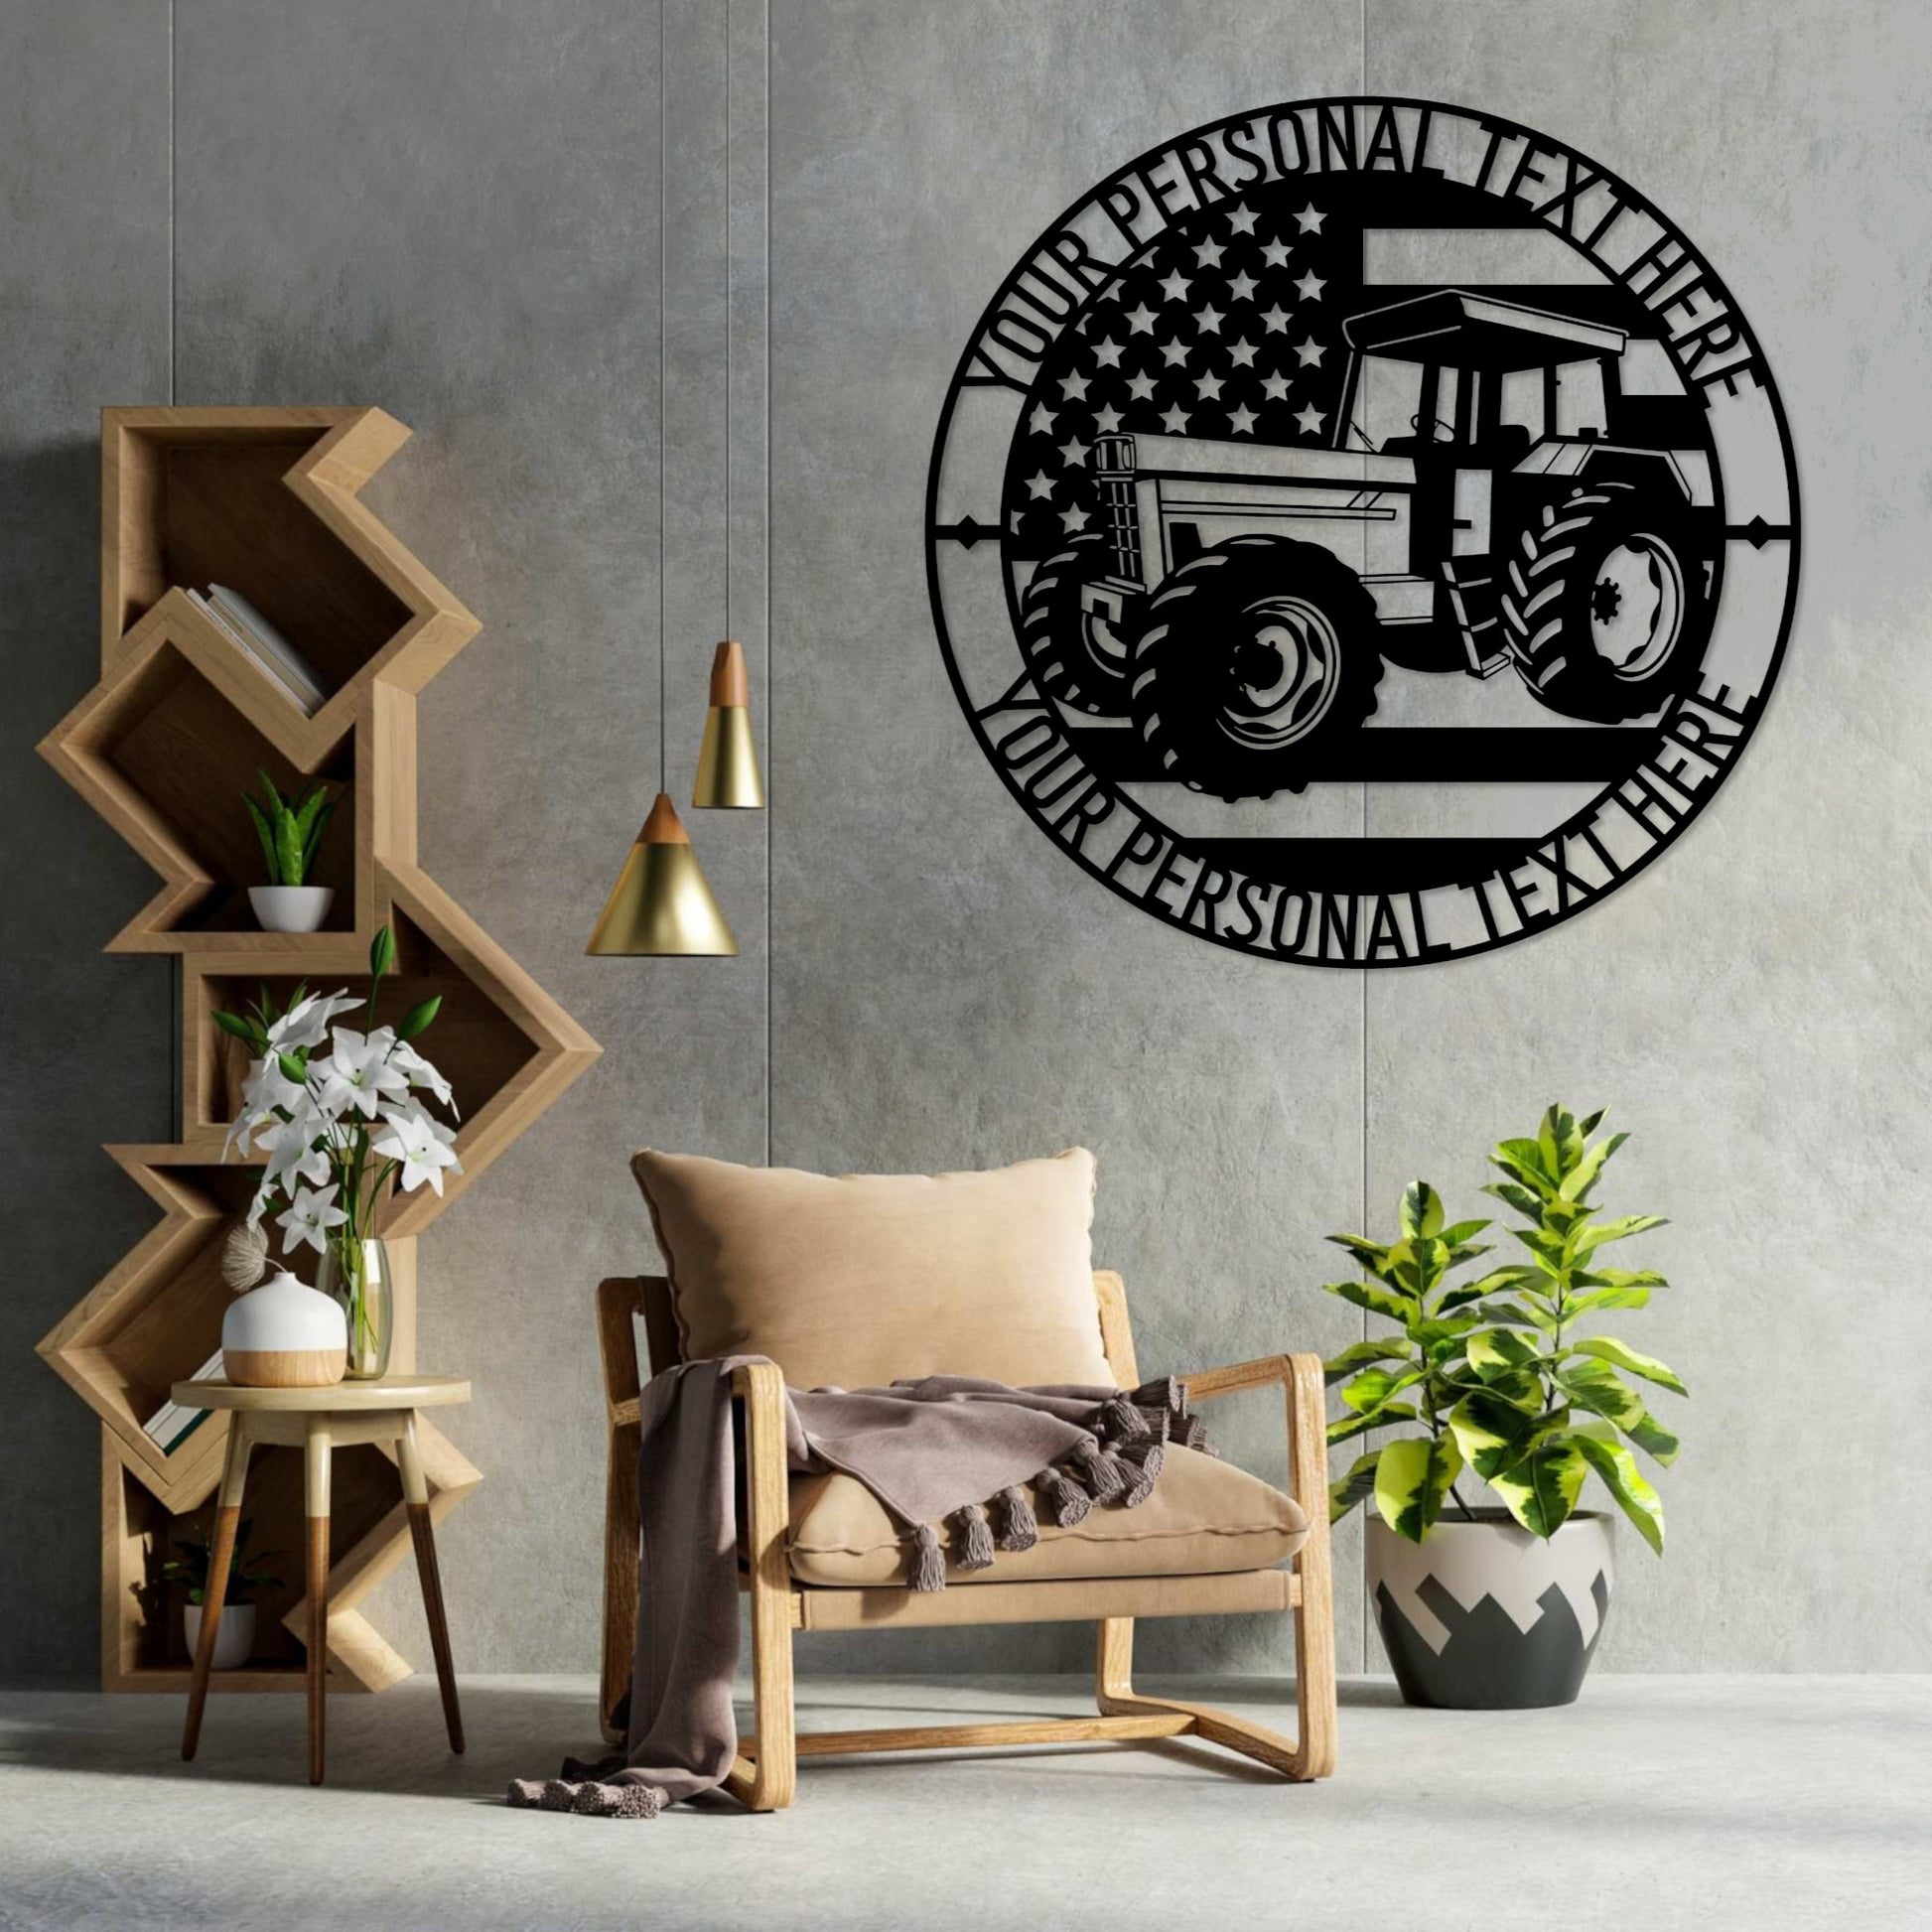 Personalized US Tractor Name Metal Sign. Custom American Agricultural Machinery. Heavy Machinery Operator. Farm Lover. Tractor Wall Art Gift